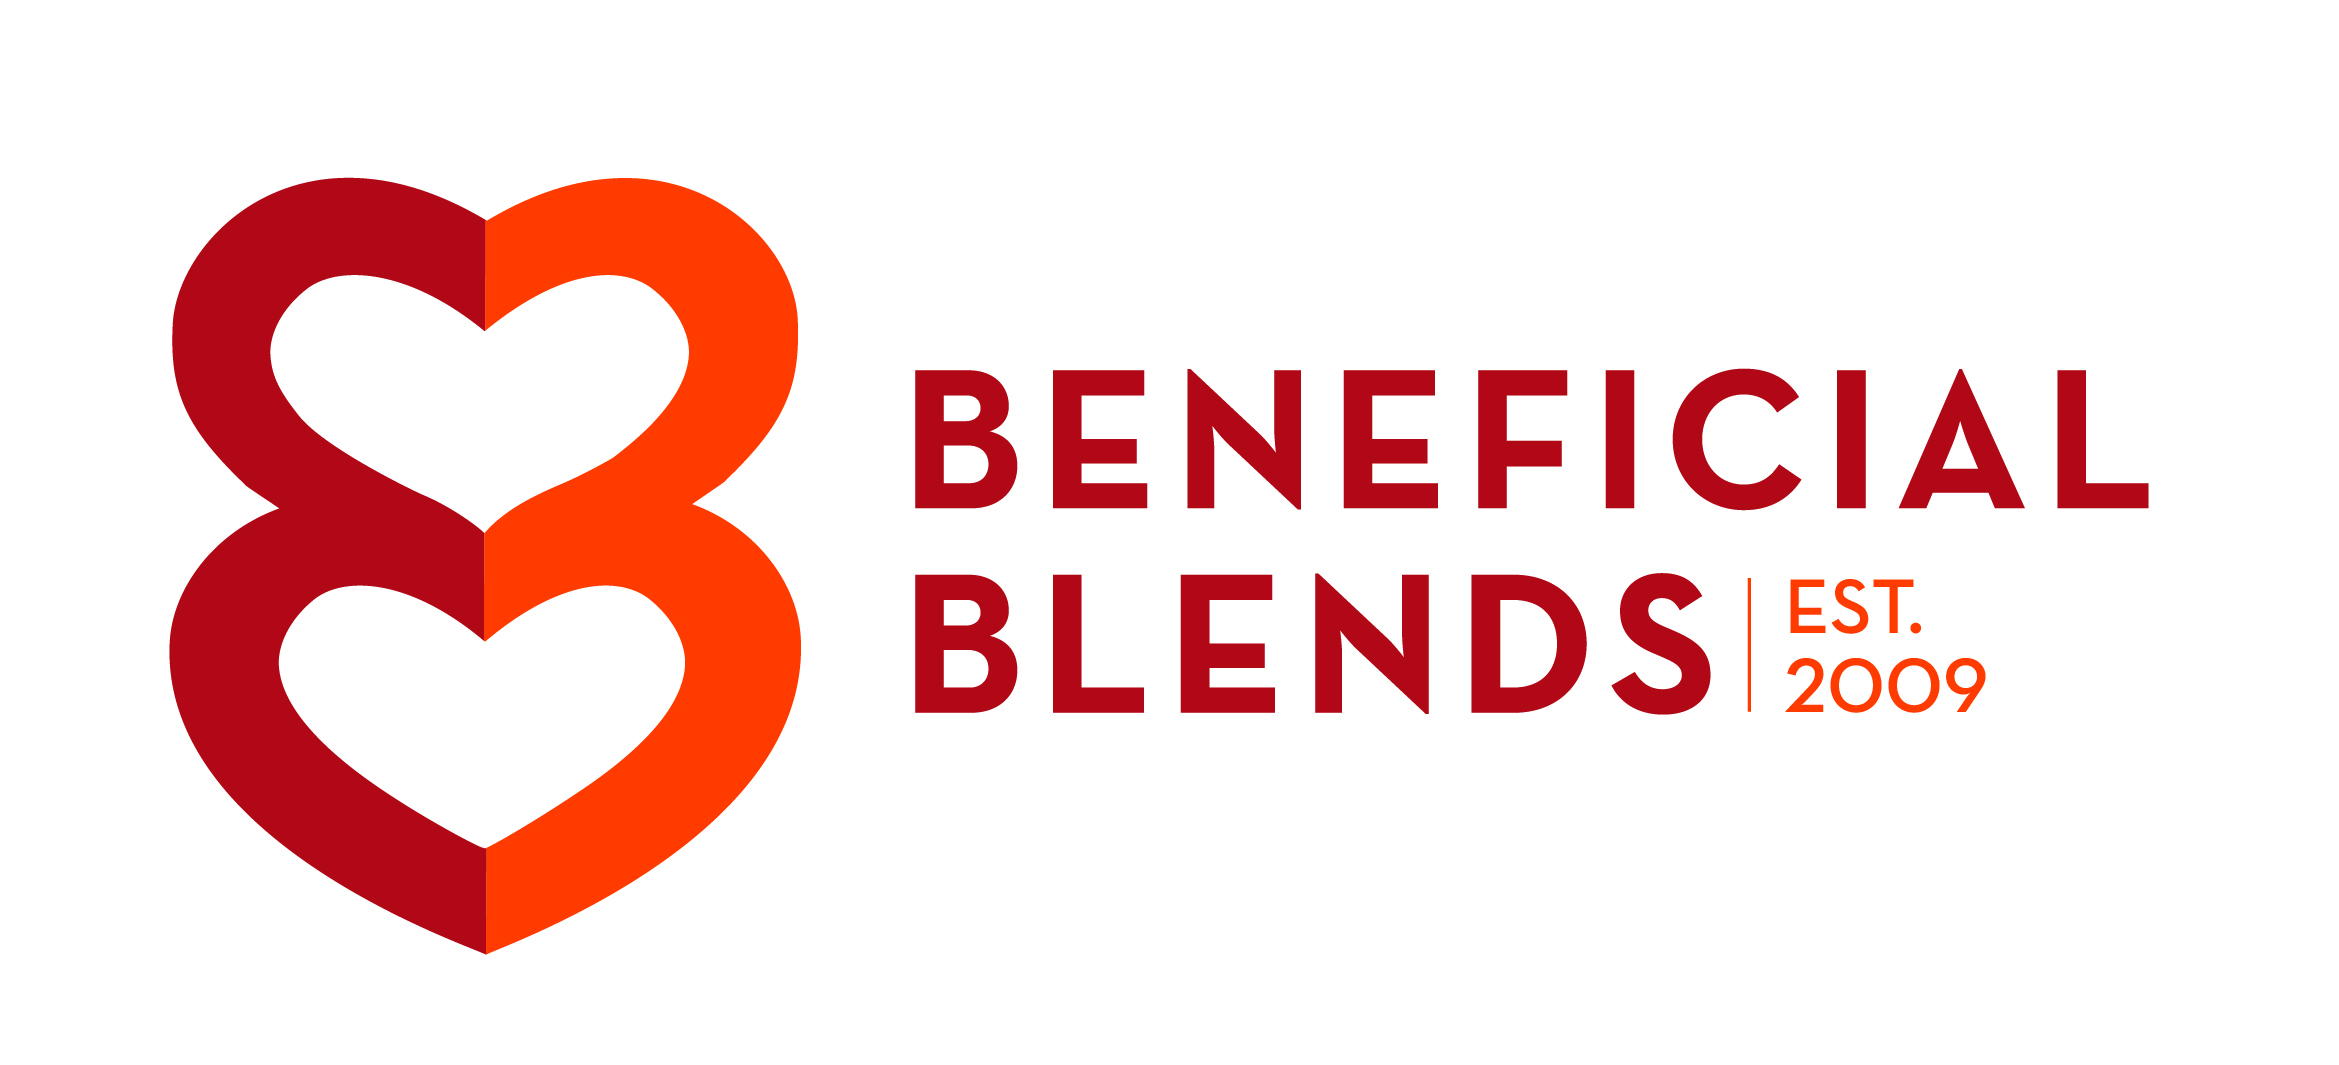 Featured Image for Beneficial Blends